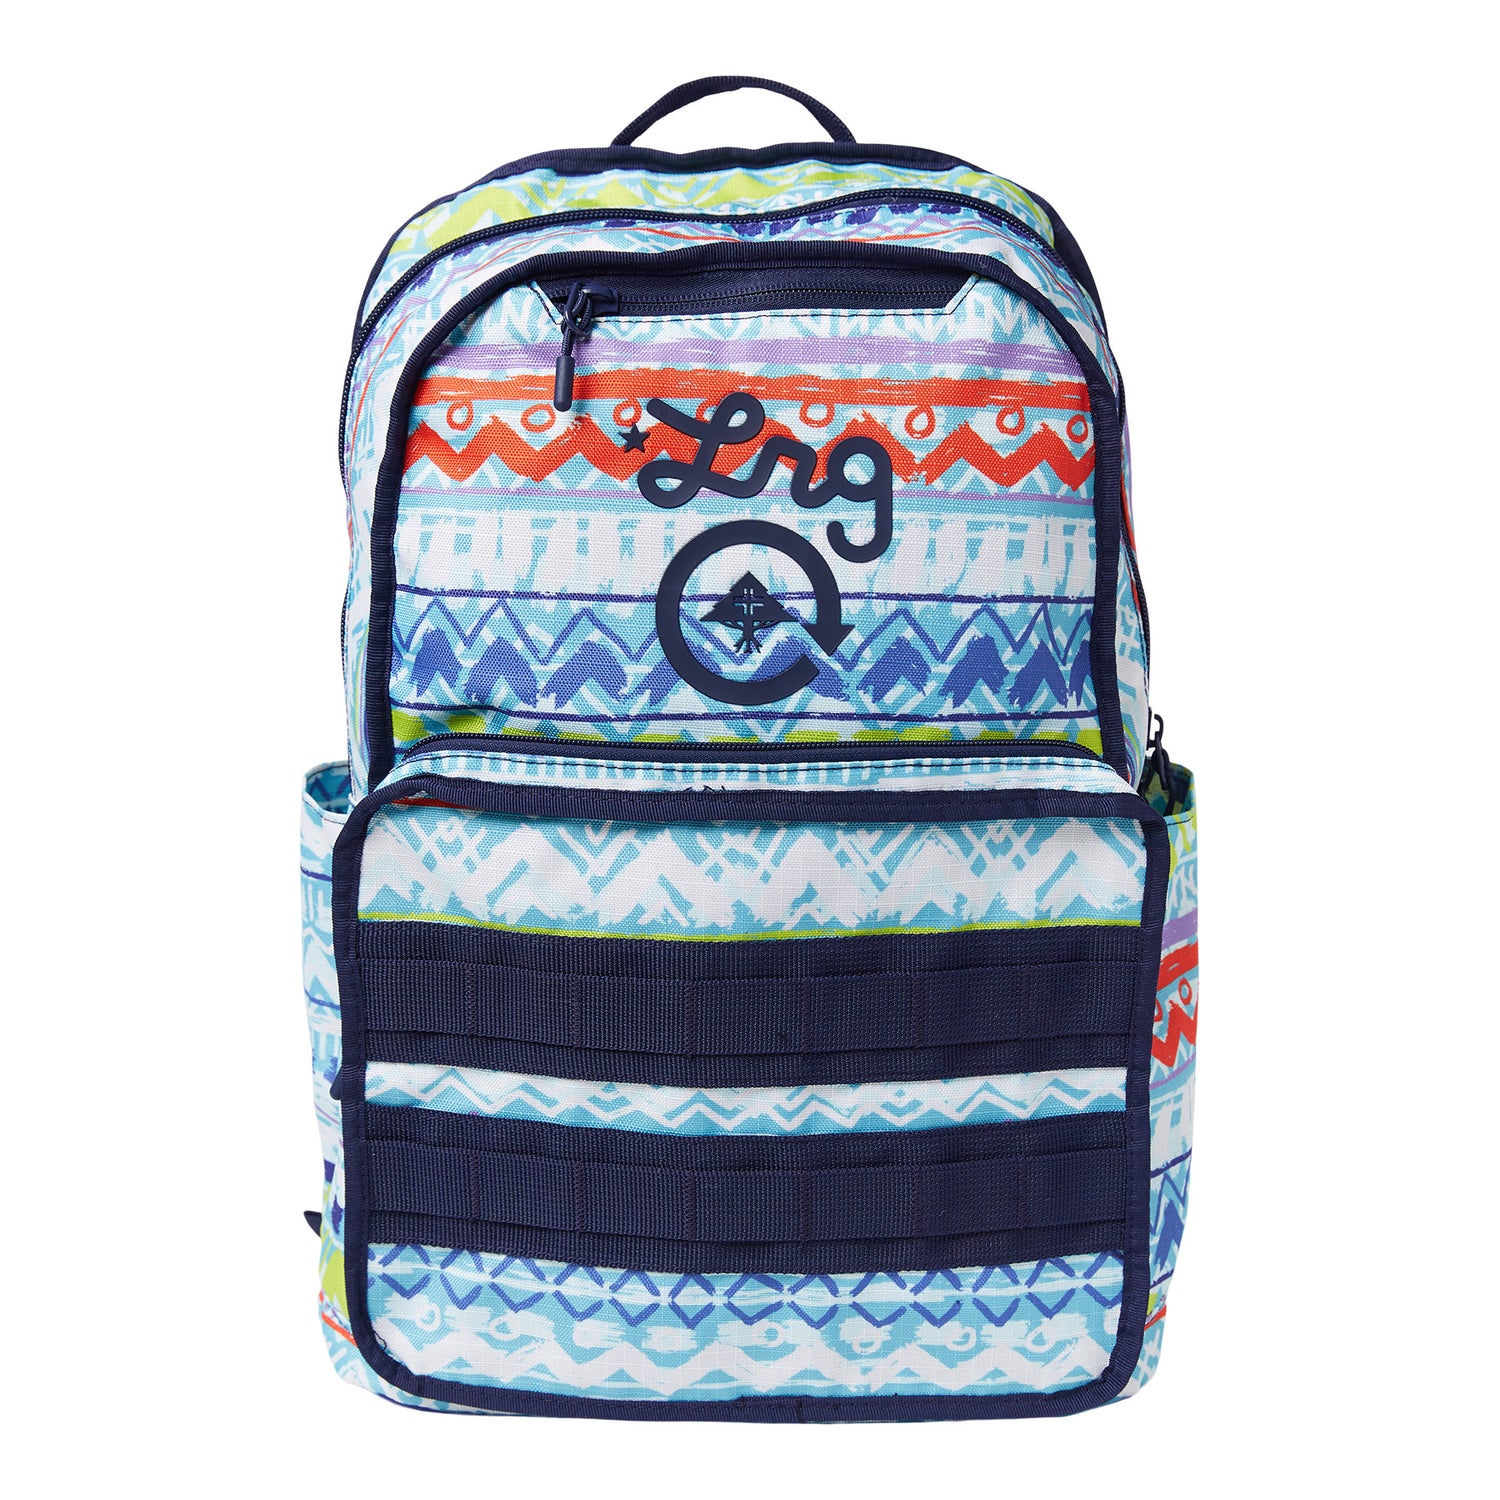 REMIX BACKPACK - TEAL